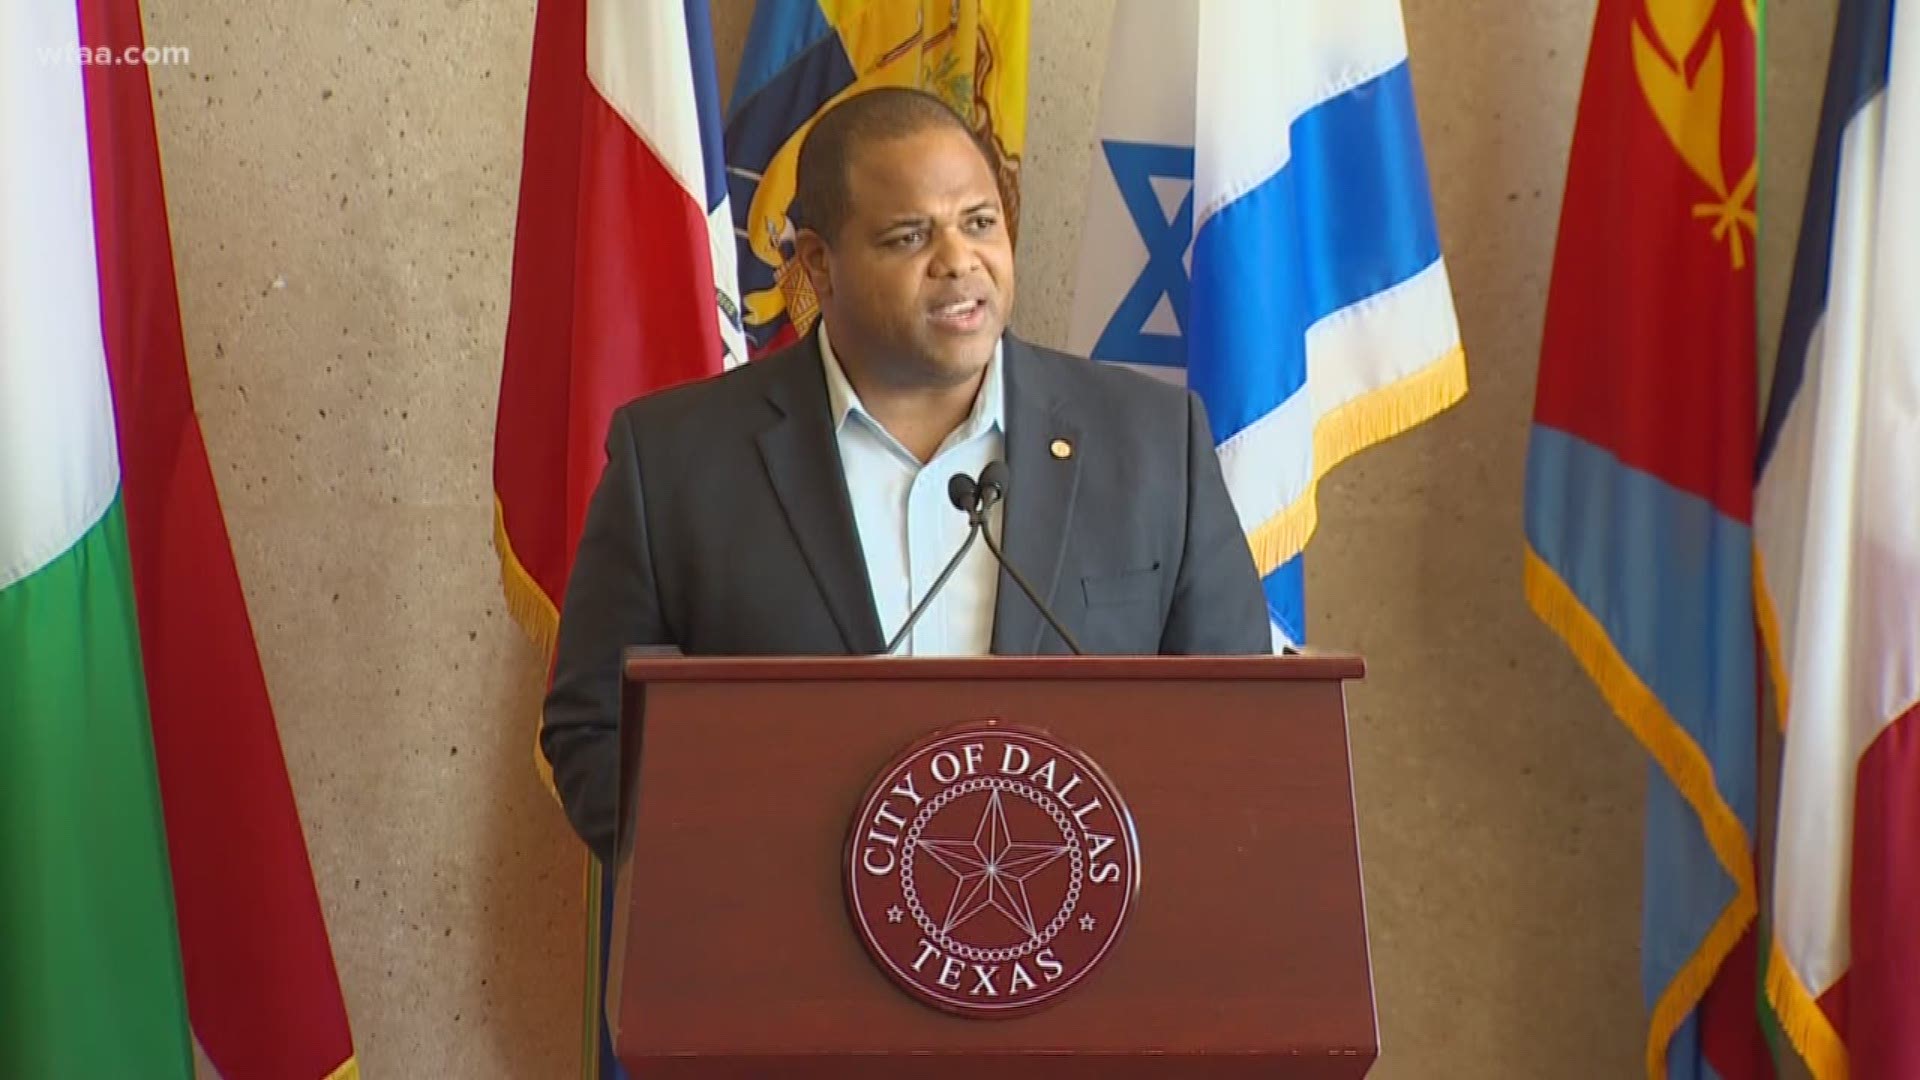 After Dallas Mayor Eric Johnson announced a task force to fight violent crime in the City, some have asked, 'Will another task force solve anything?'